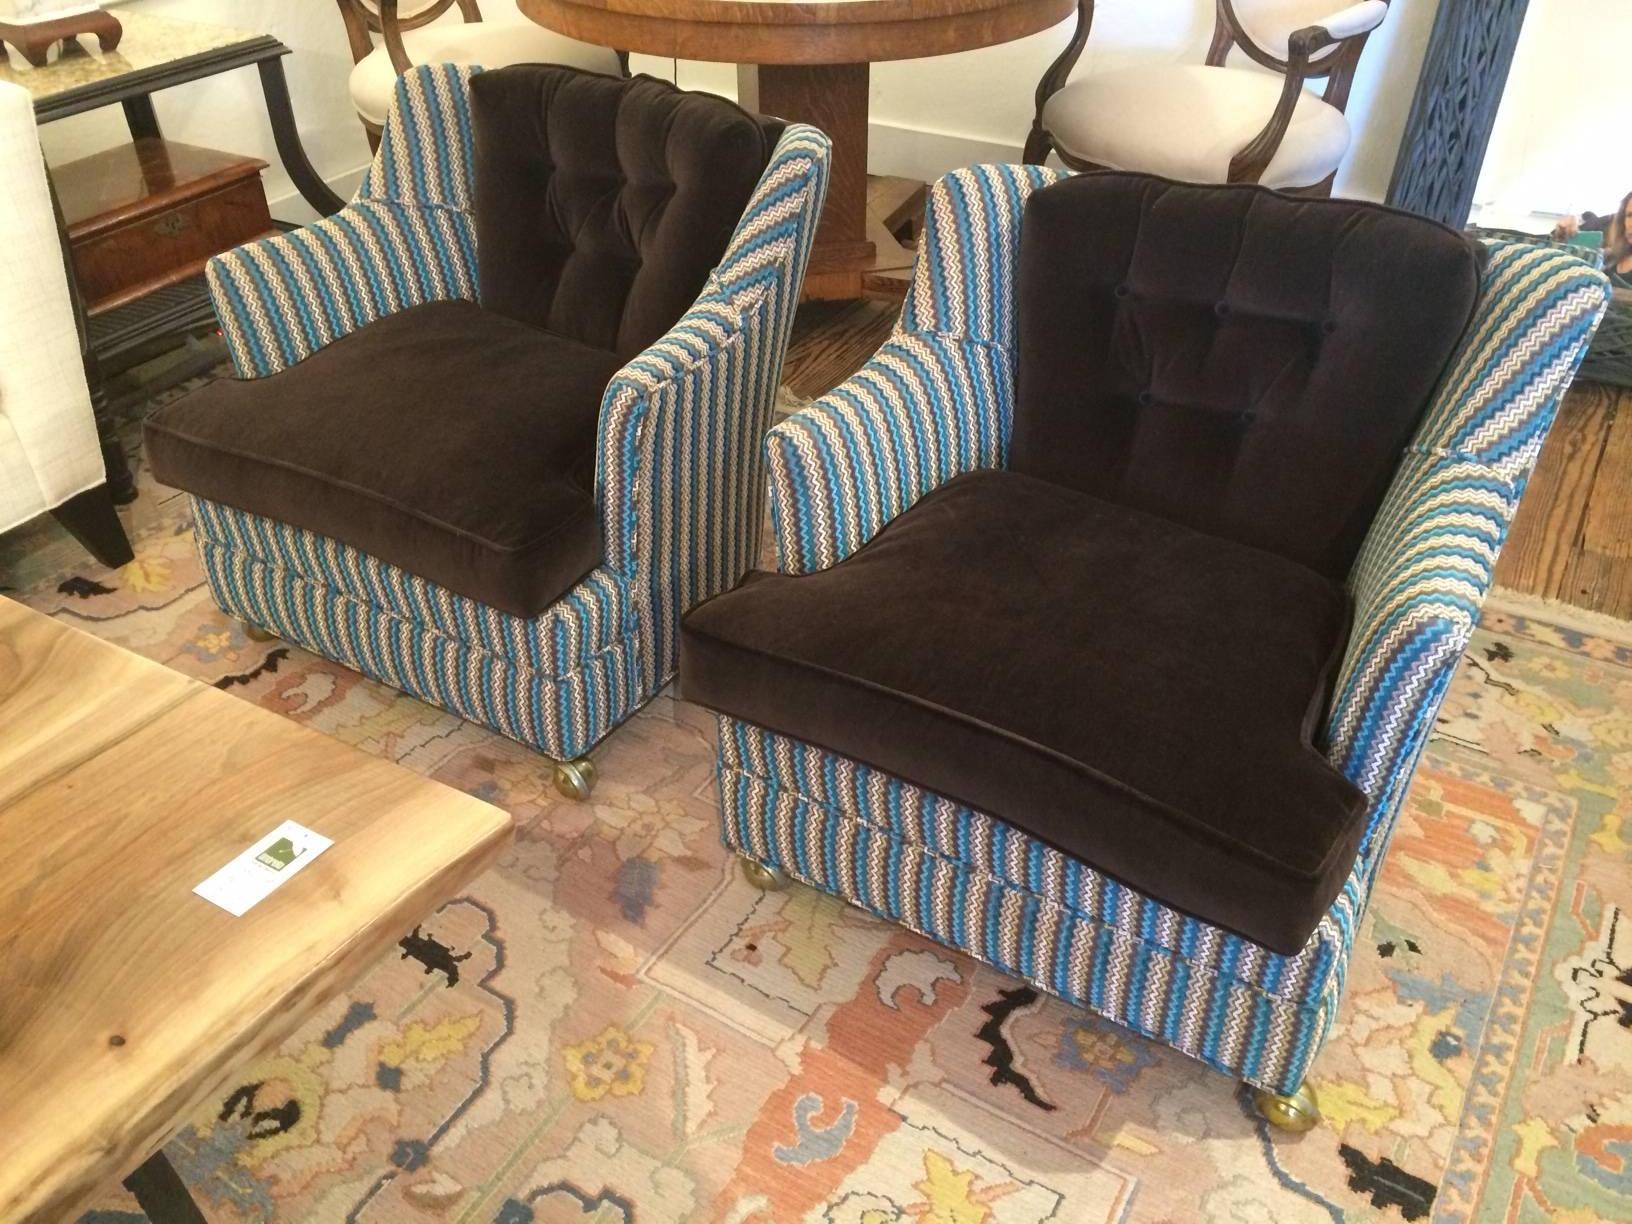 Darling low slung upholstered club chairs, originally from the 1960s, contemporized with an imaginative mix of top of the line fabrics. Reupholstered about 3 years ago. Seats and backs are chocolately brown velvet, the rest is a modernized flame